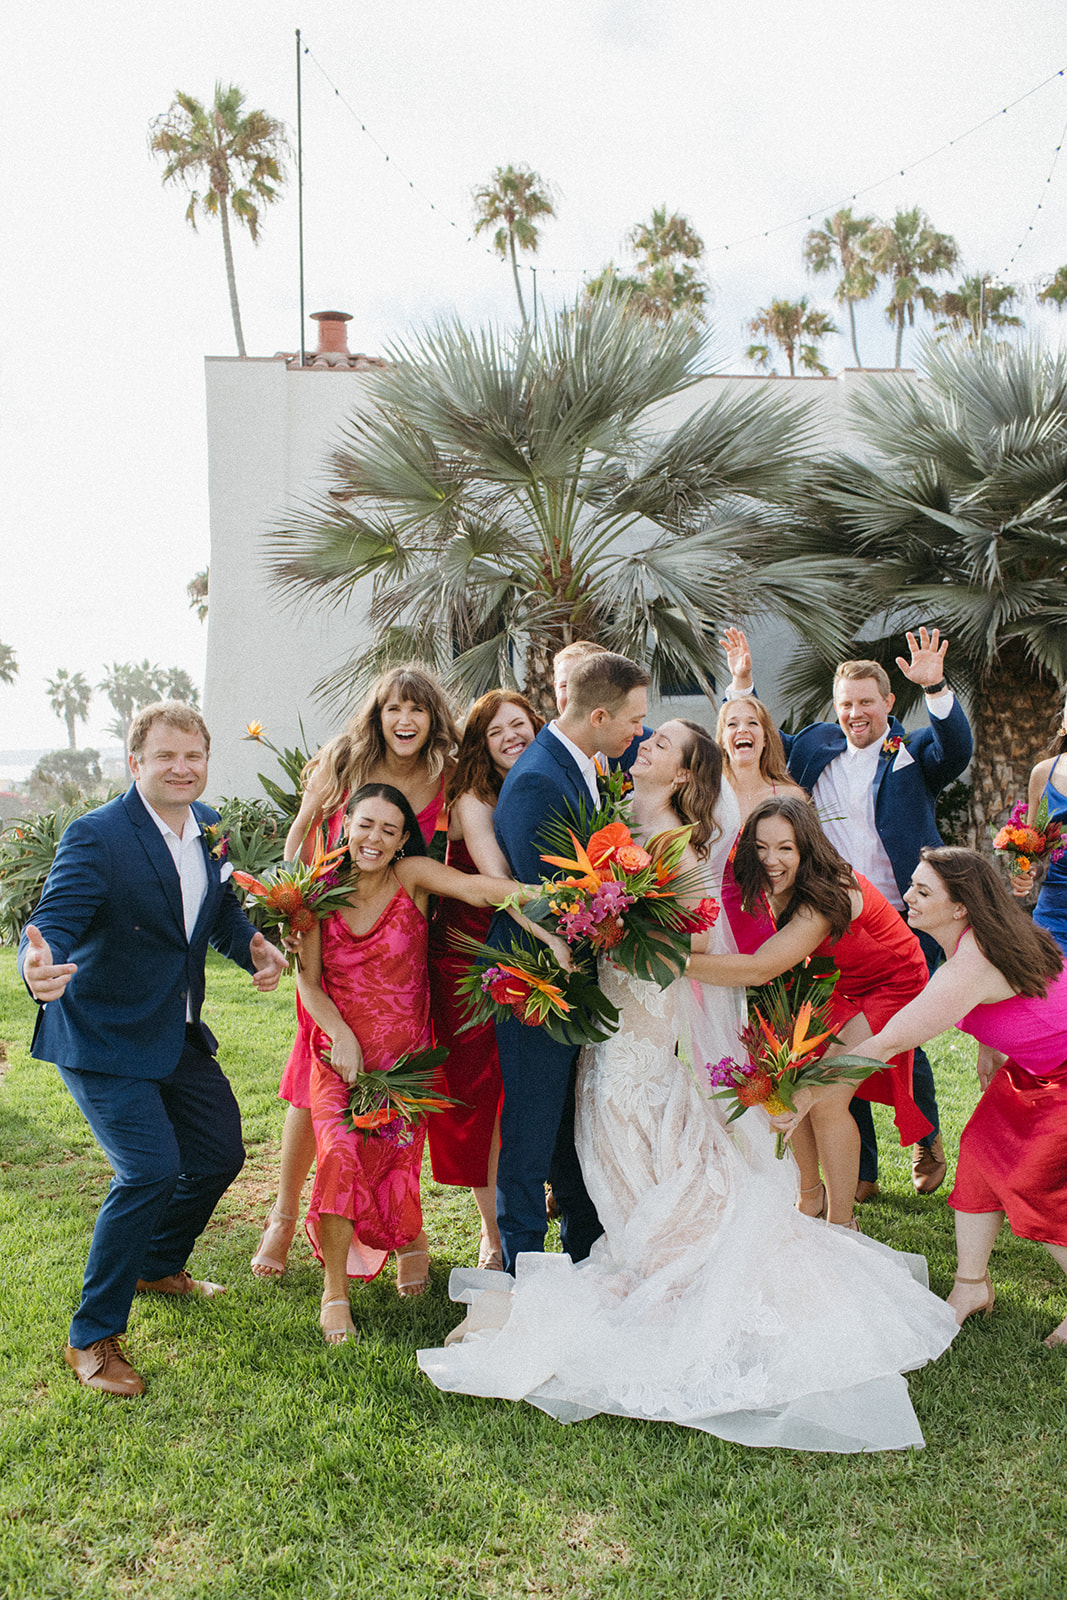 bride in strapless champagne with lace overlay mermaid wedding dress and tropical bouquet and groom in blue suit with white tie with wedding party in bright pink dresses and blue suits